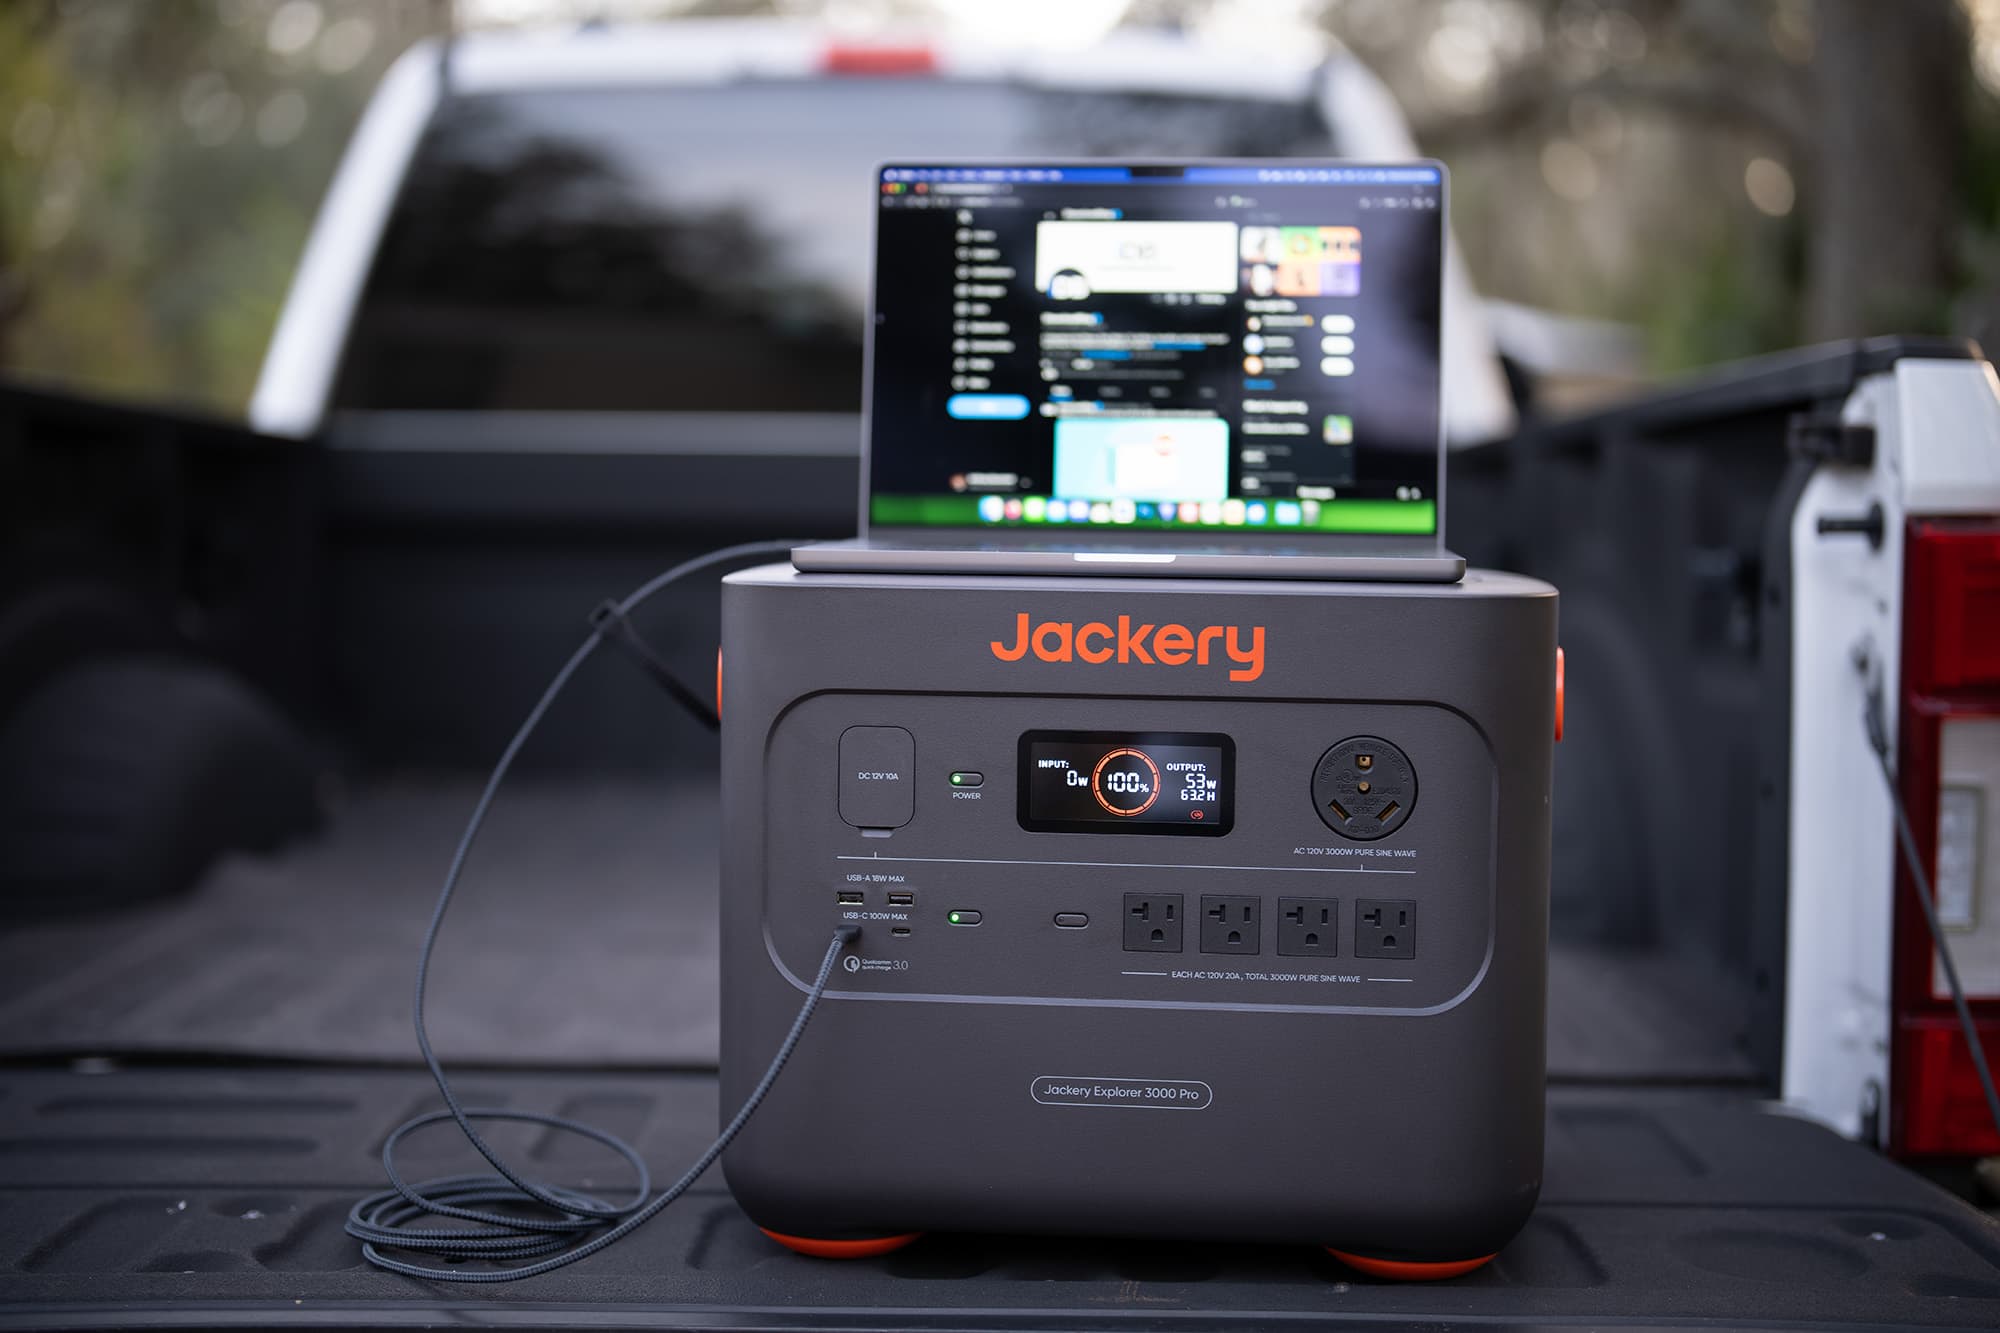 Jackery powers pretty much anything you own with the Portable Power Station Explorer 3000 Pro